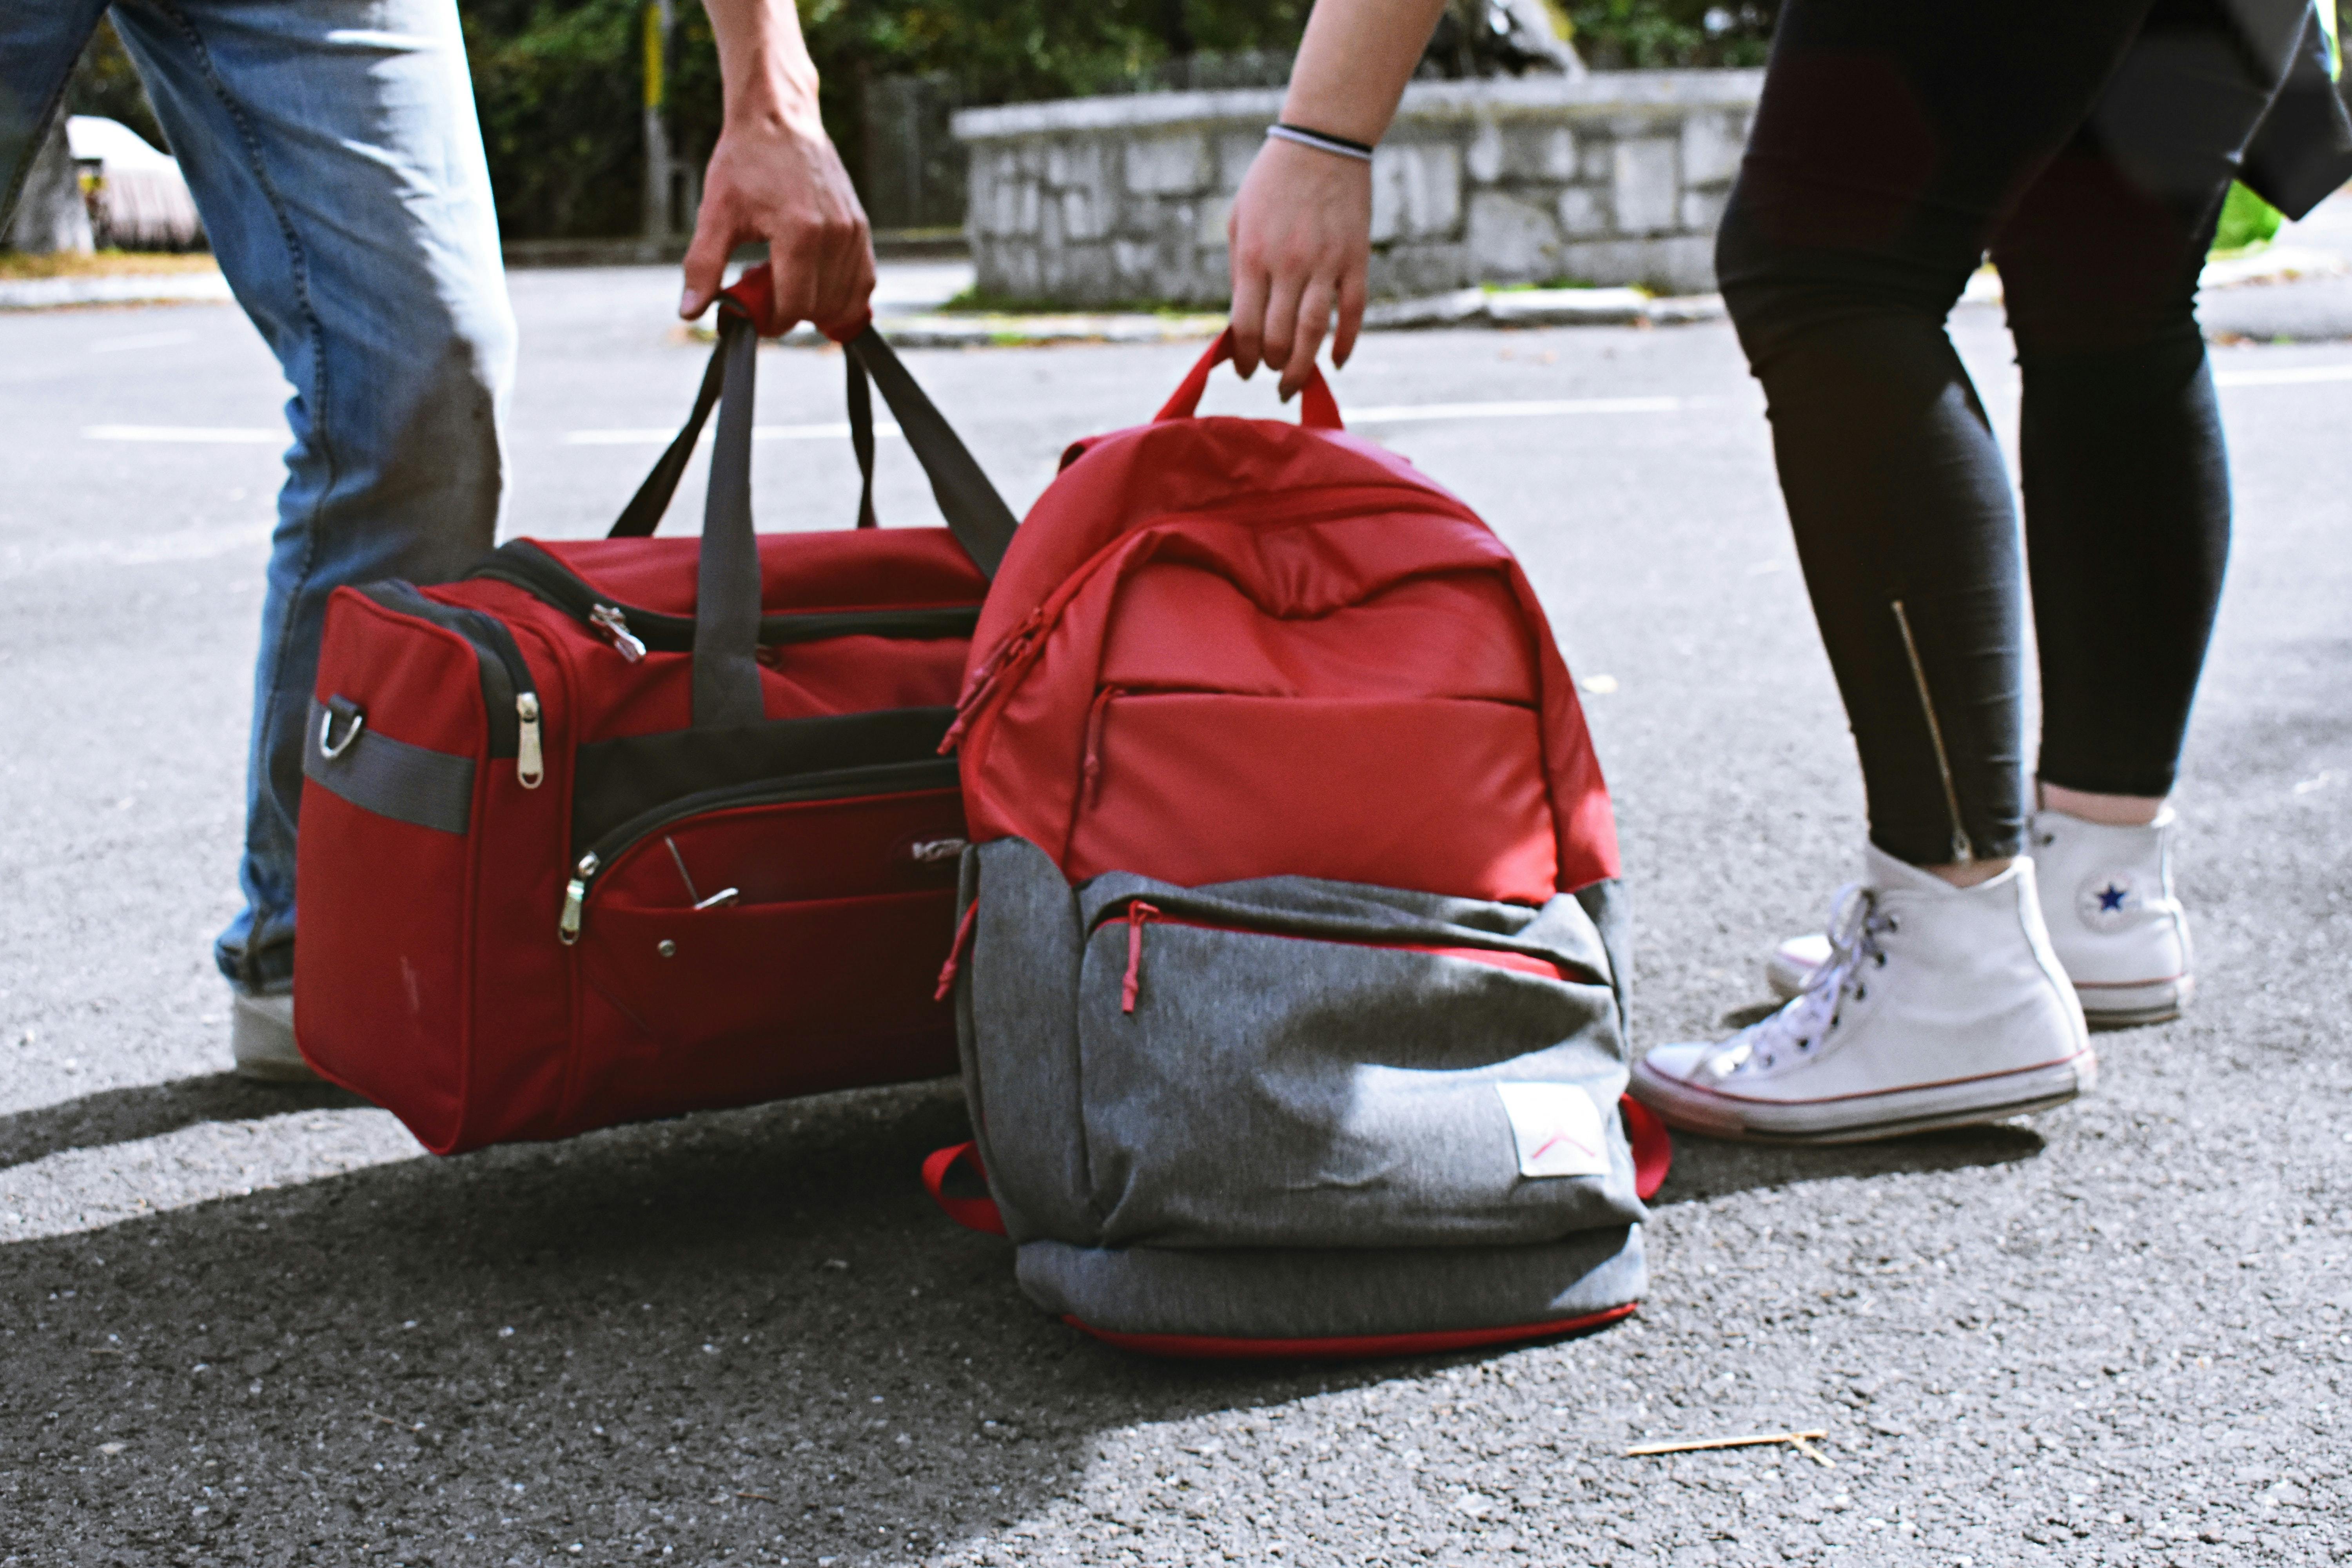 How Can I Find Luggage That Fits My Budget Without Compromising Quality